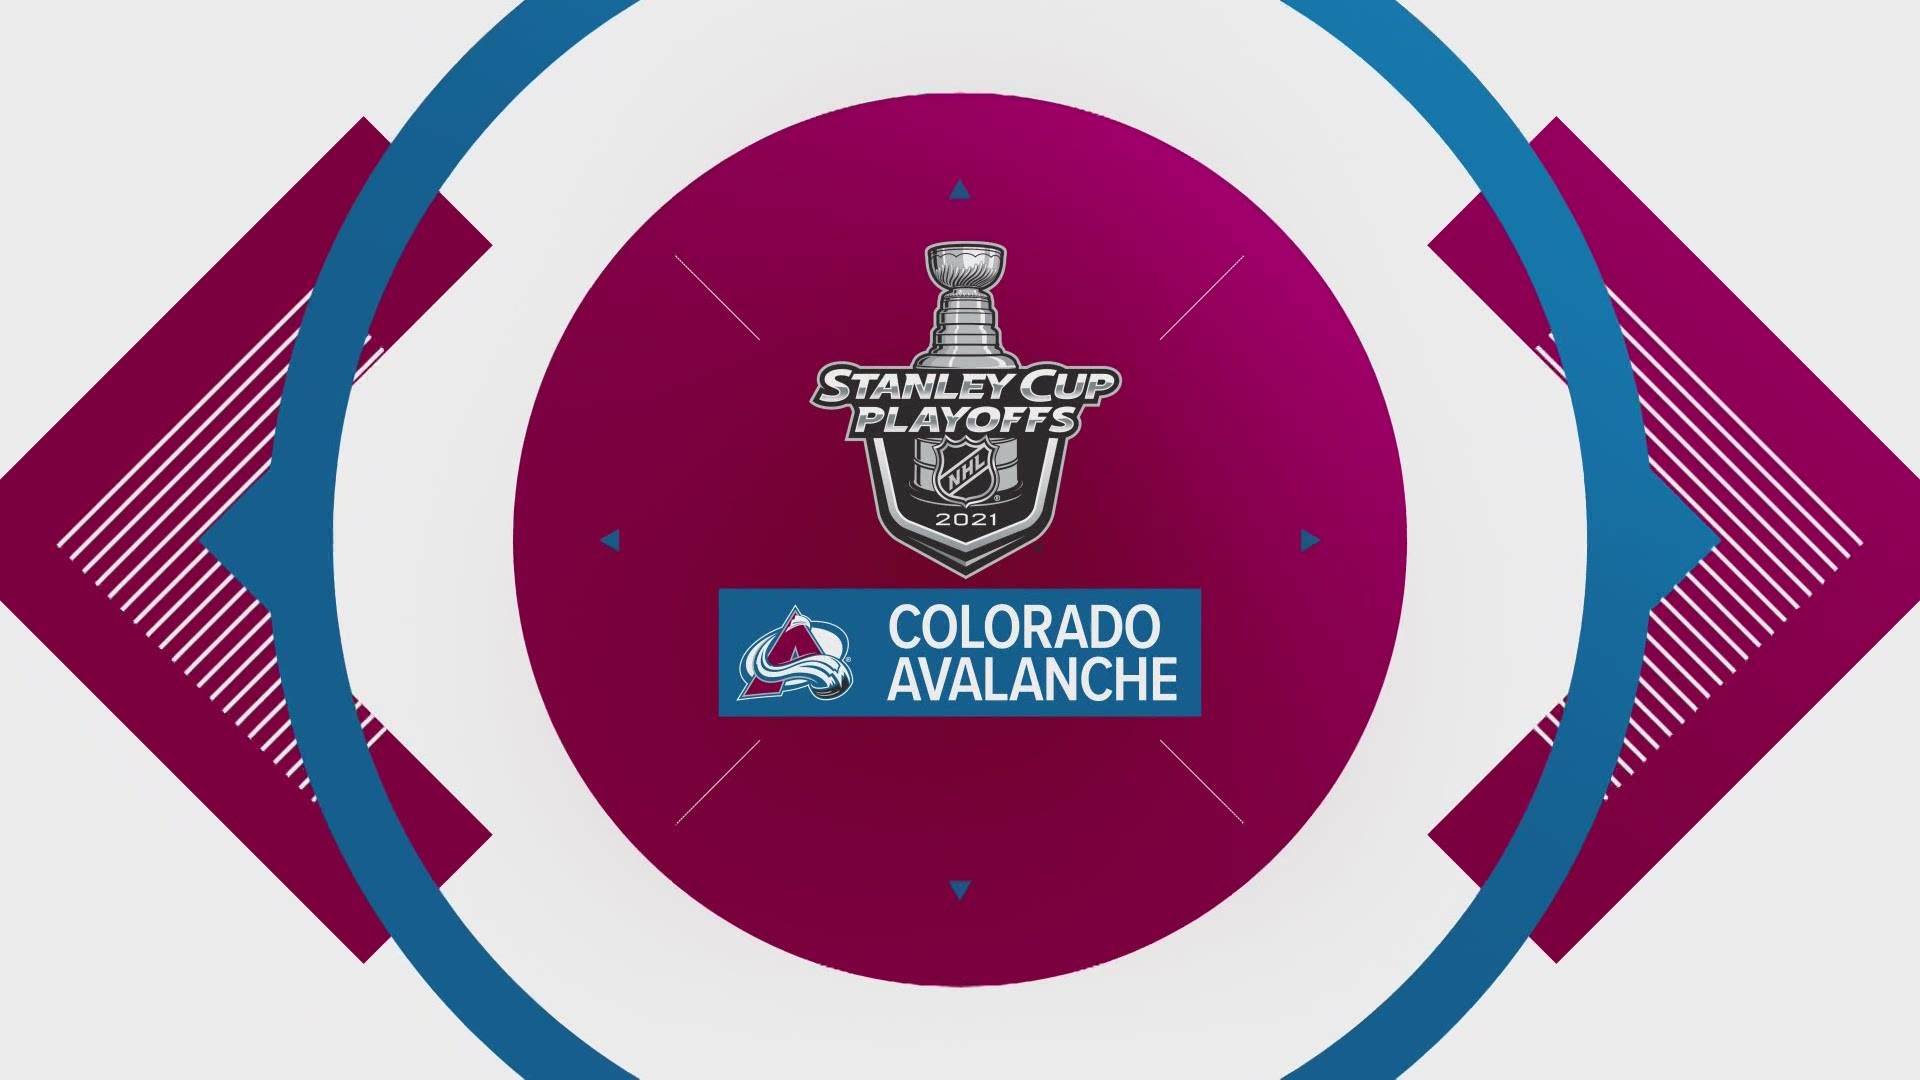 Colorado Avalanche Wallpapers - Apps on Google Play